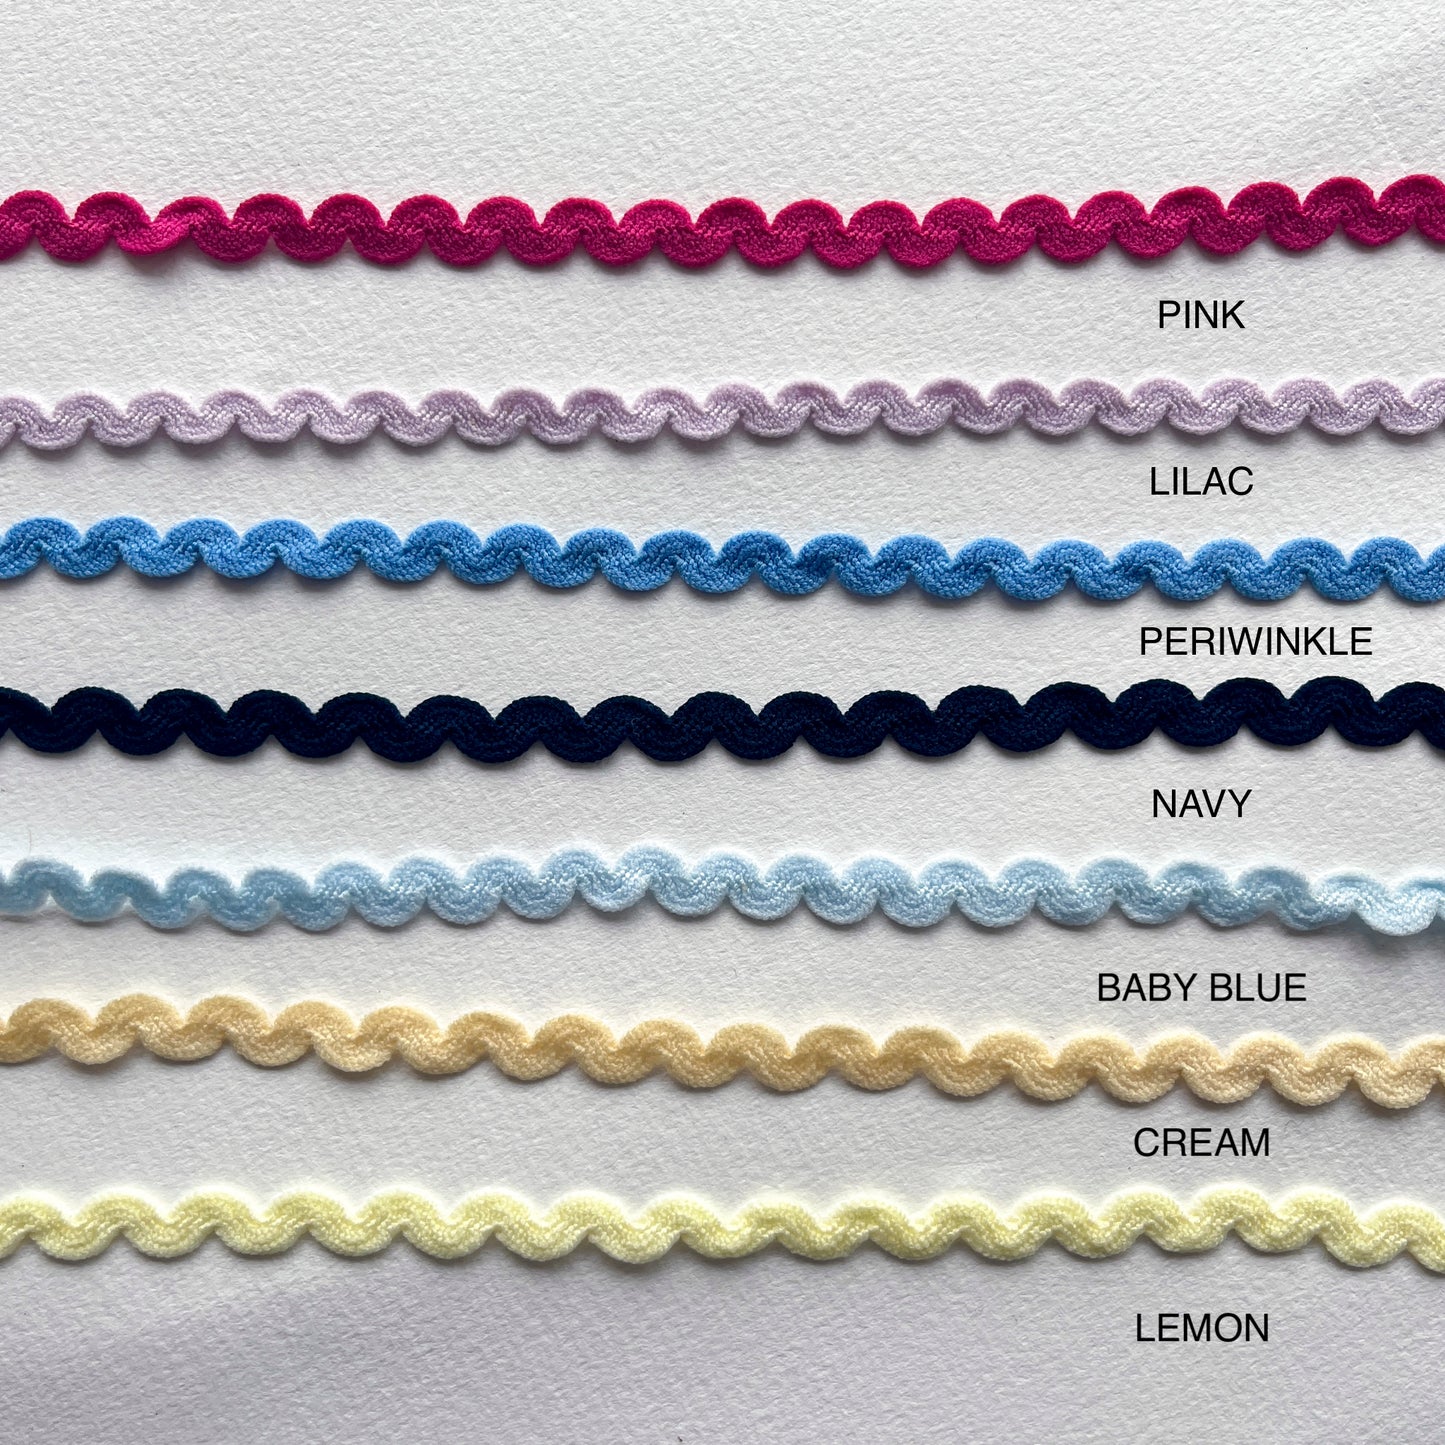 This stretch ric-rac is perfect to add a unique trim to your lingerie and garment makes, or use to embellish cards and papercrafts. Available in 13 delightful colours